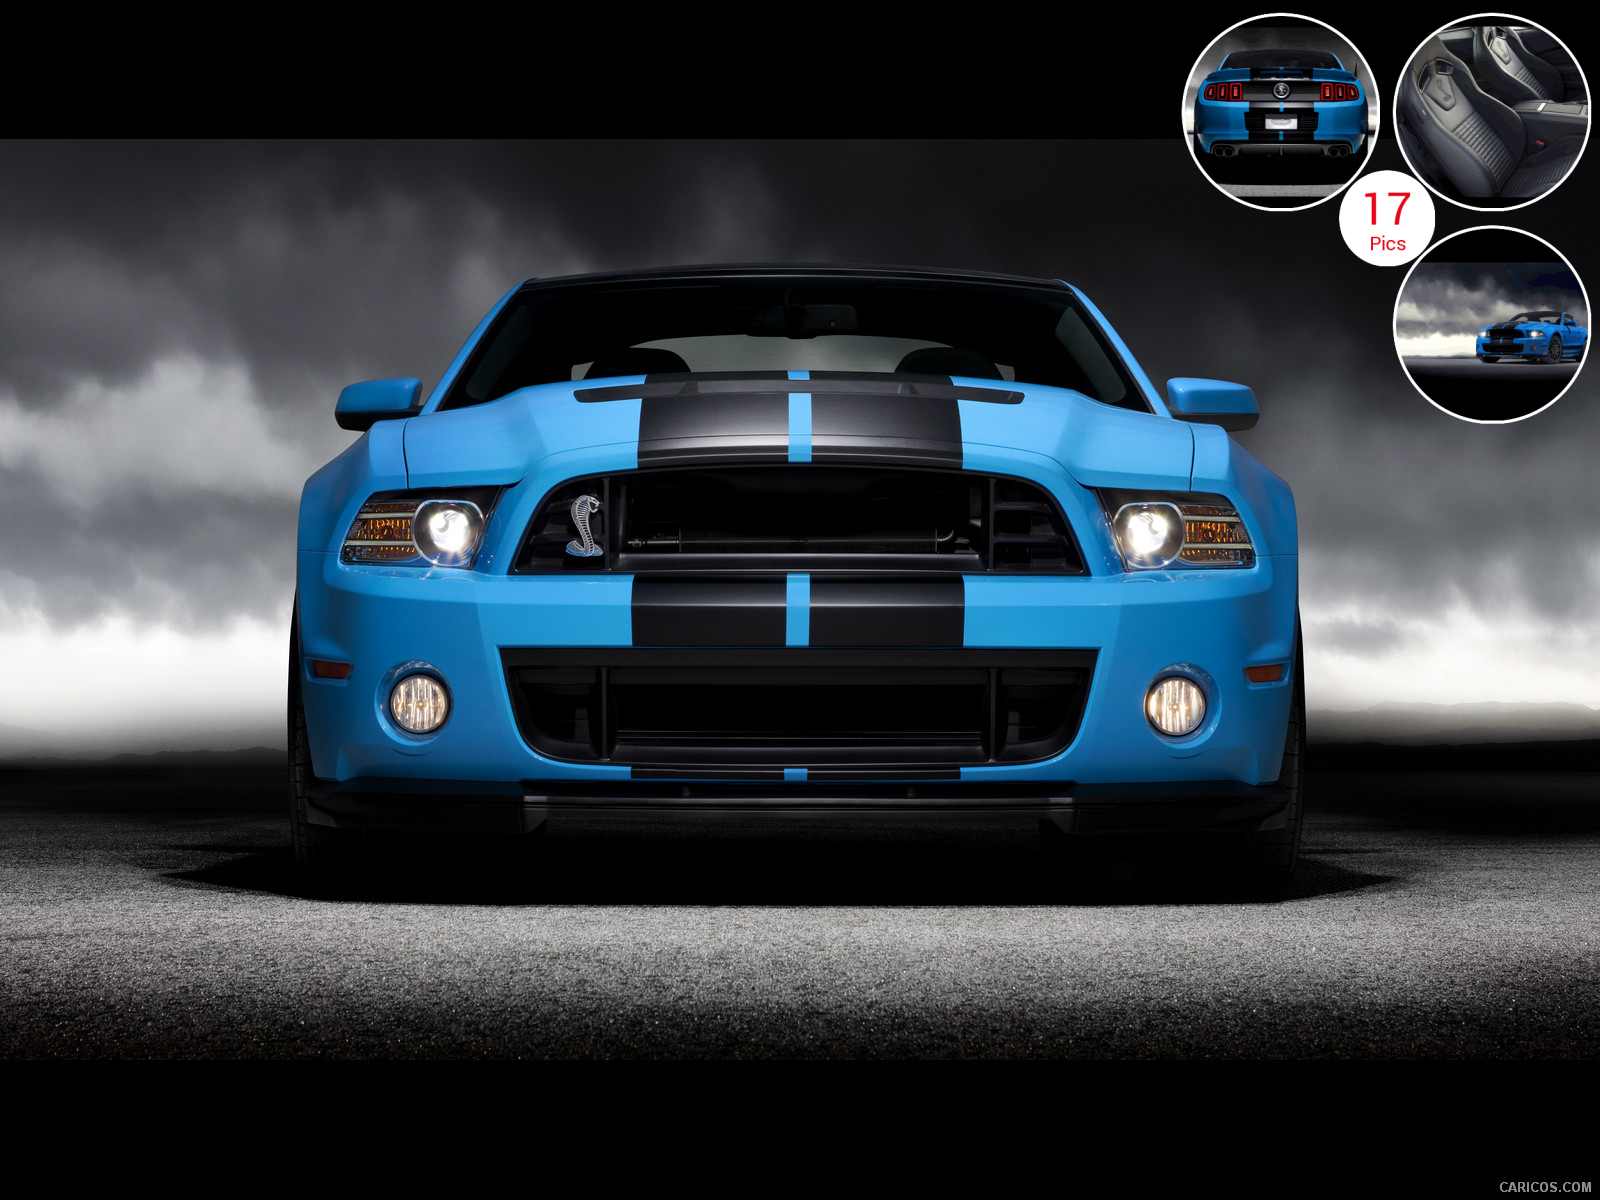 2013 Ford Mustang Shelby GT500 - Front | Wallpaper #4 | 1600x1200